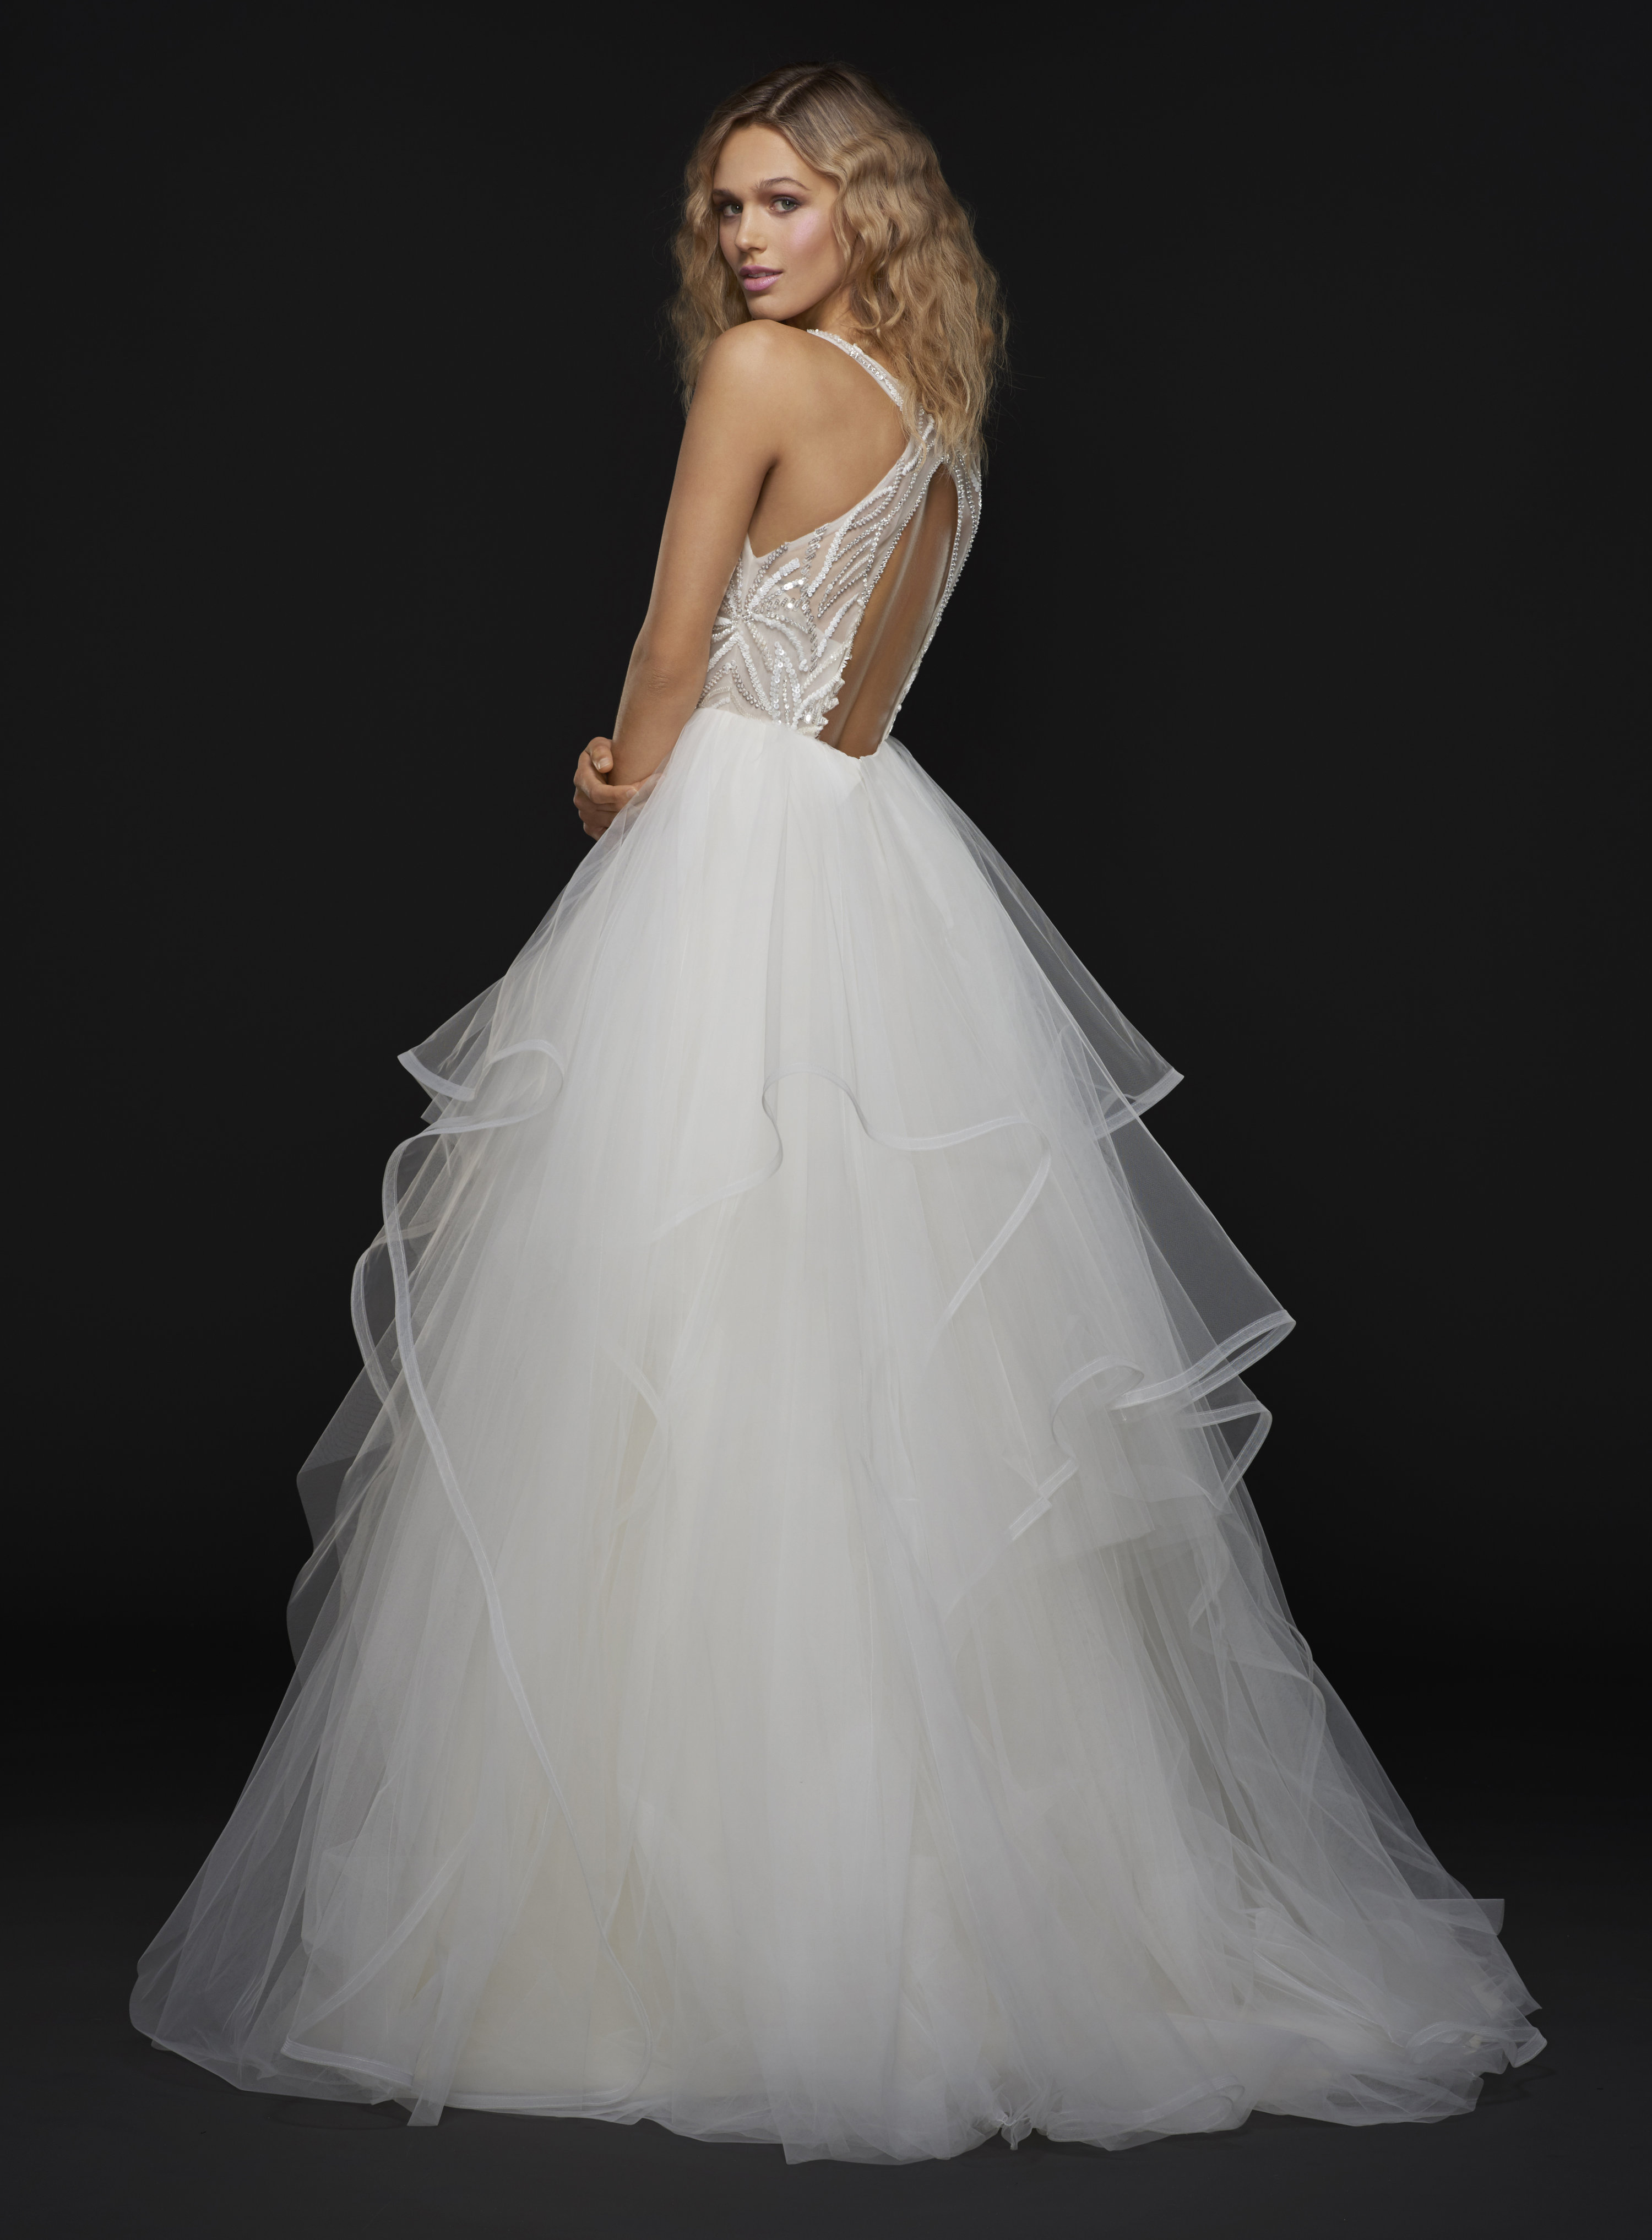  Bridal  Gowns  and Wedding  Dresses  by JLM Couture Style 